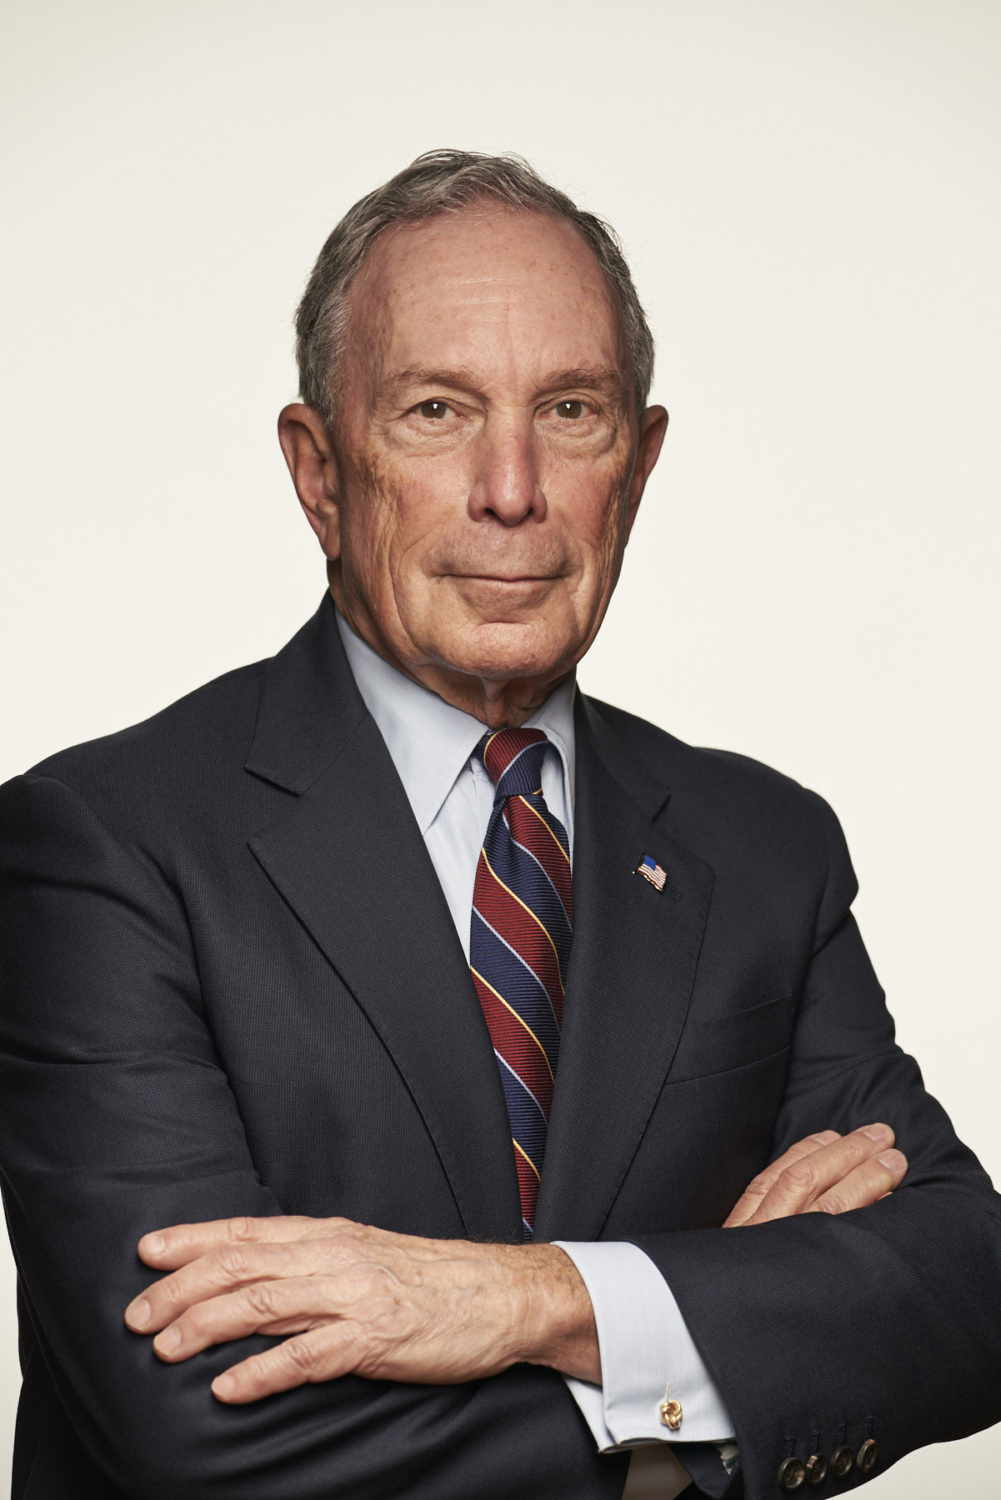 Portrait of Mike Bloomberg